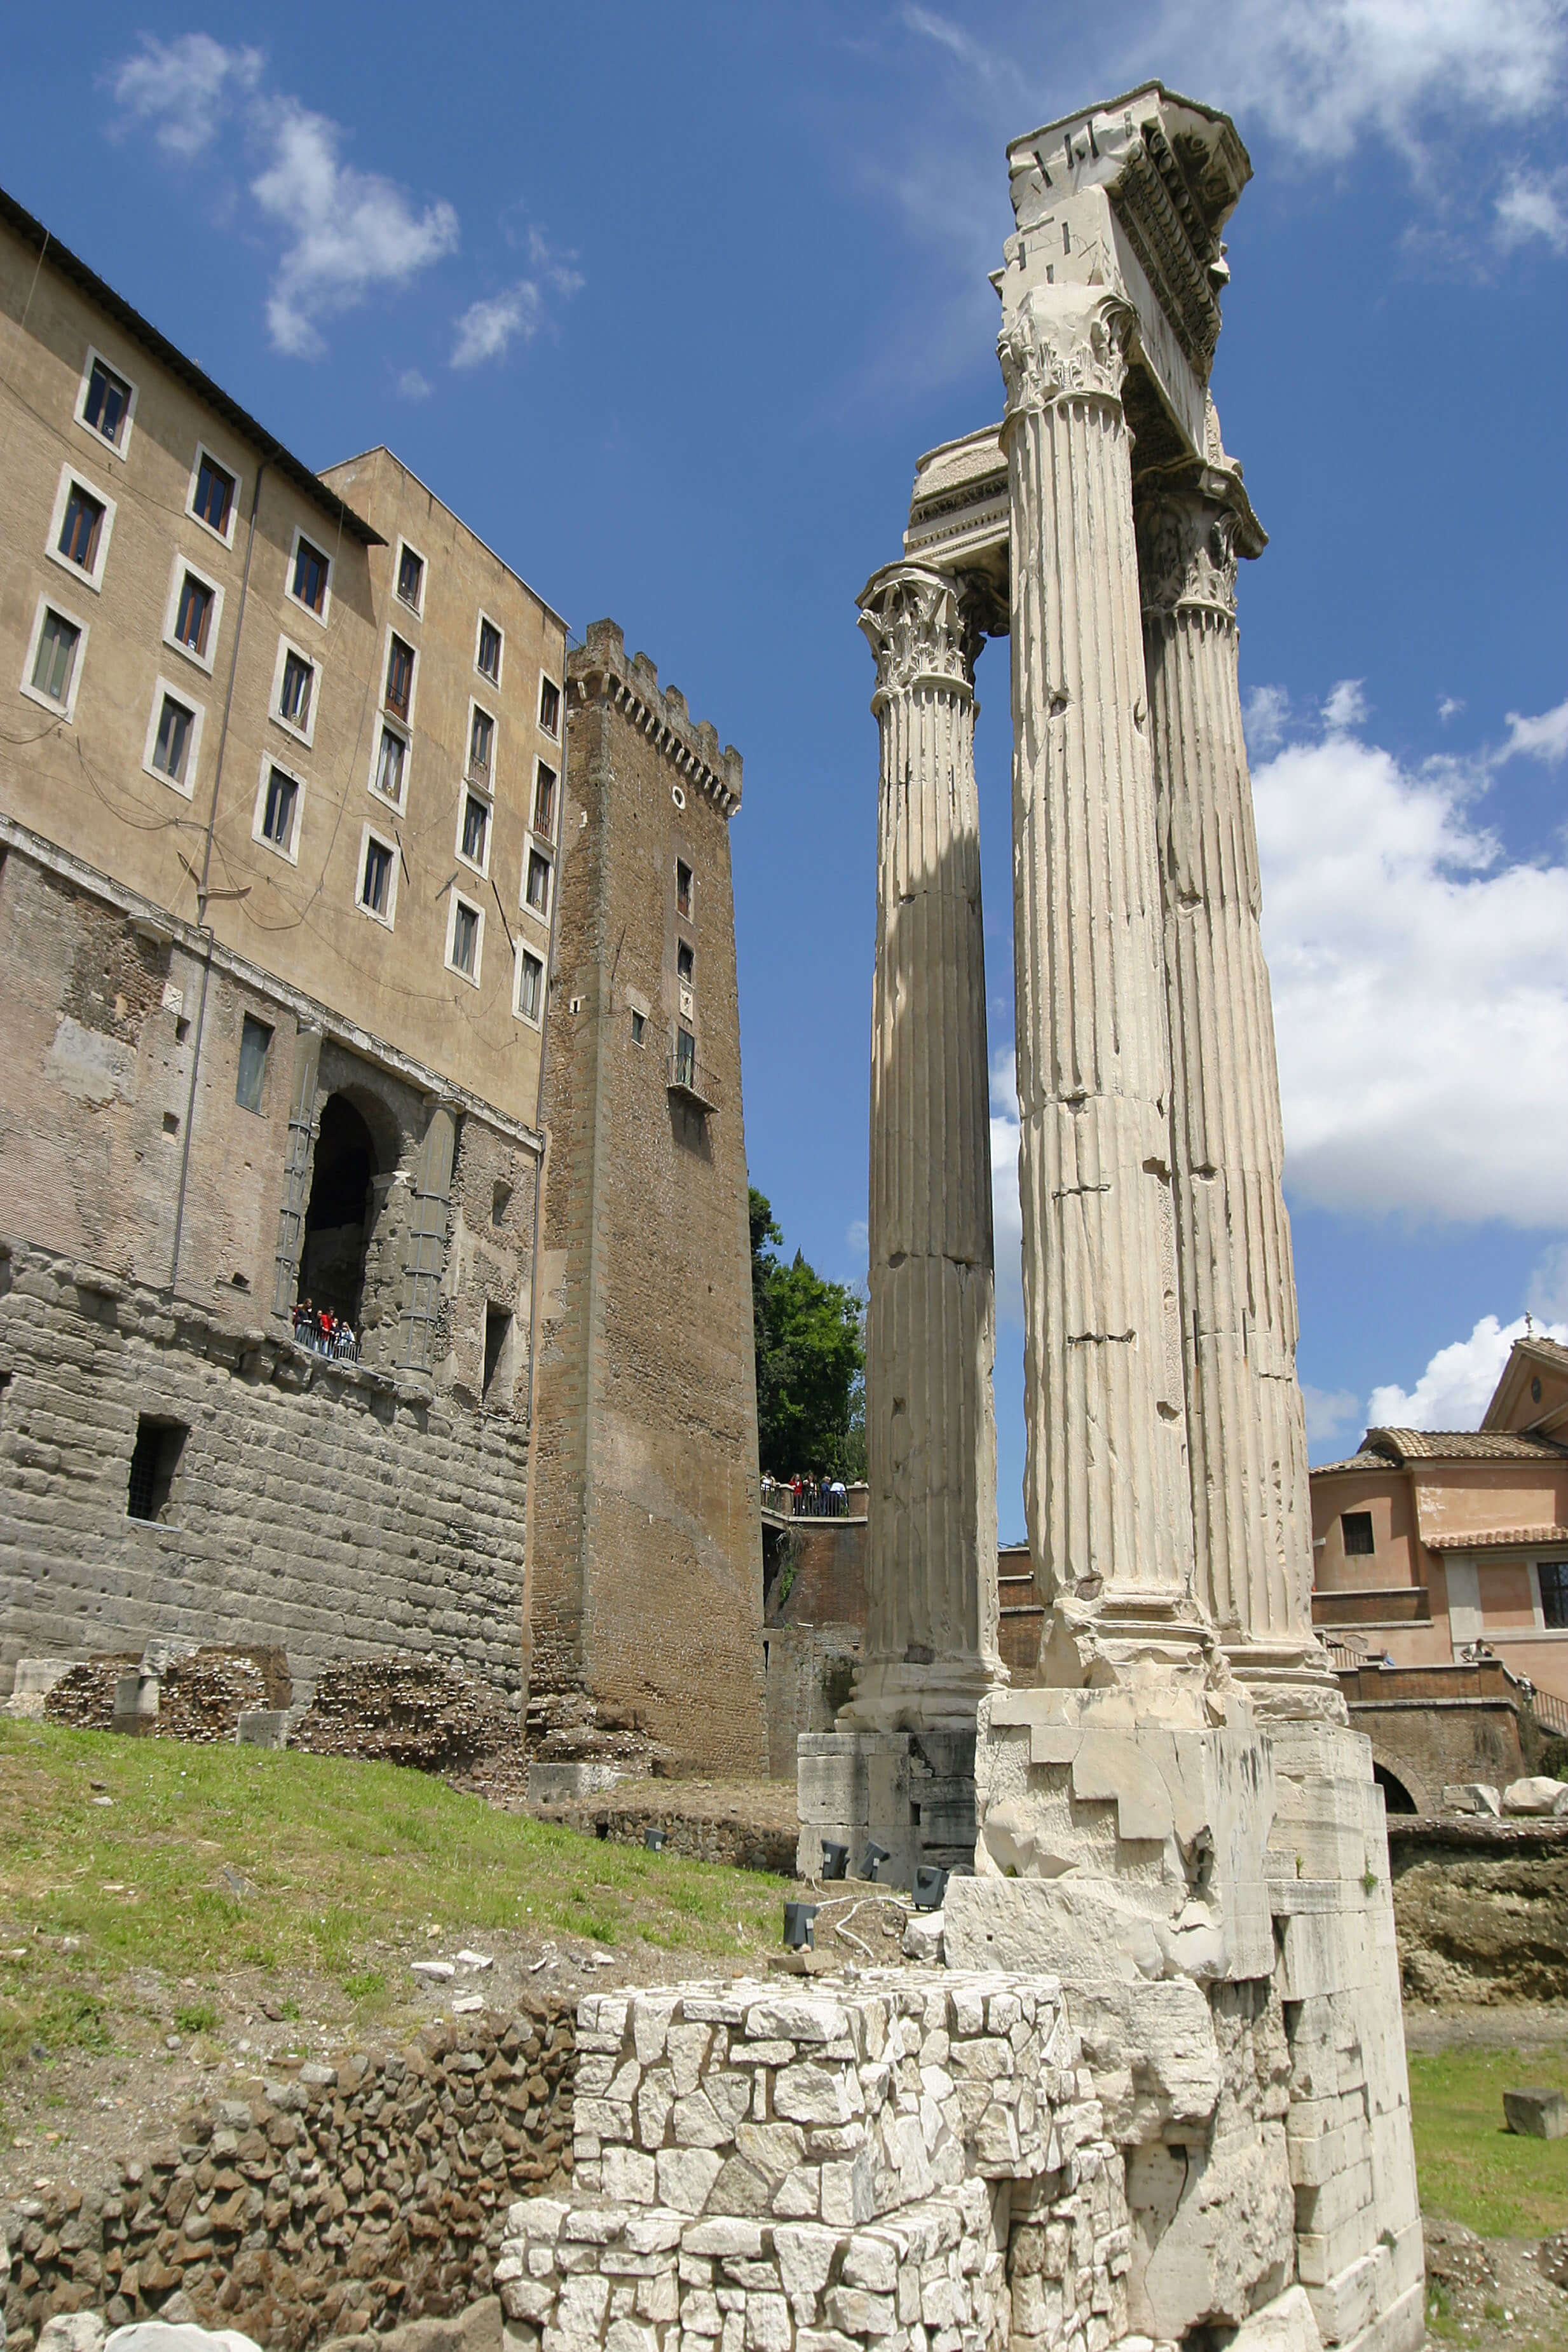 Three Roman columns standing on a raised platform. The other remains of the temple are no longer standing. On the left is a modern building with stairs up to the front.